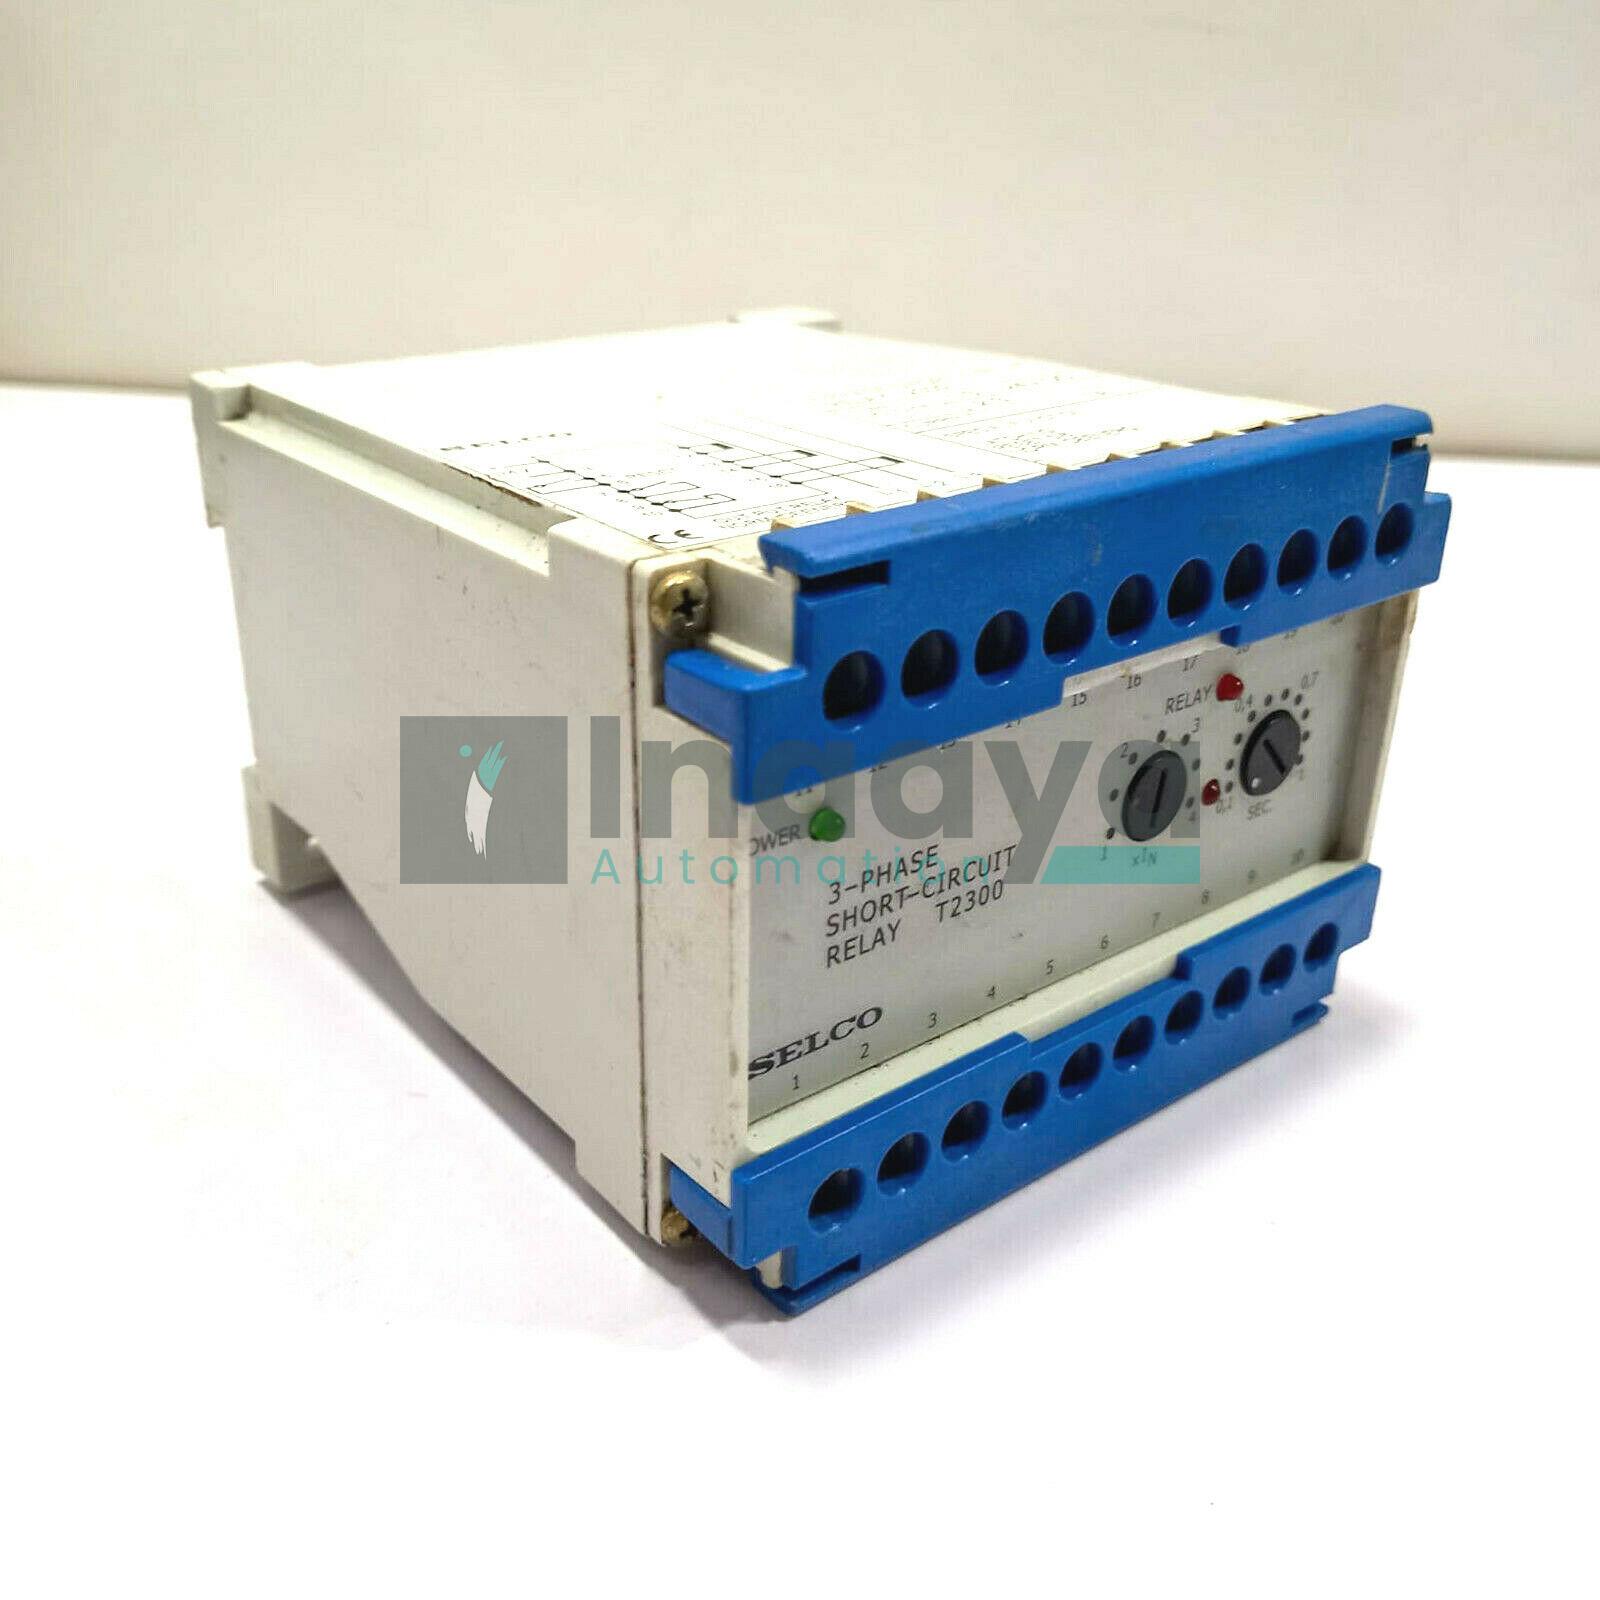 SELCO T2300-11 3-PHASE SHORT-CIRCUIT RELAY